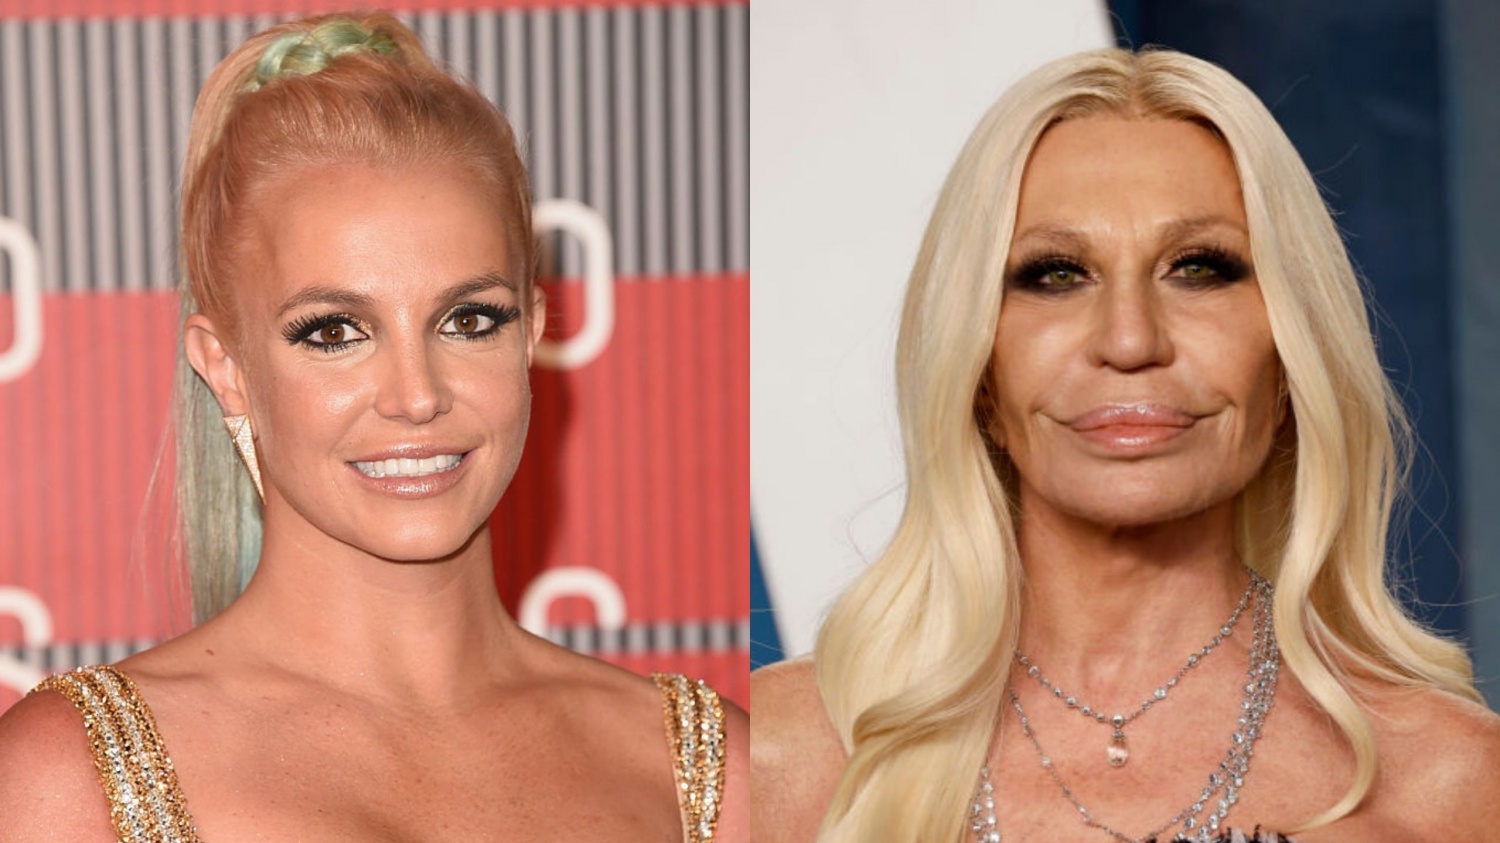 Donatella Versace Reveals Britney Spears’ Current Condition After